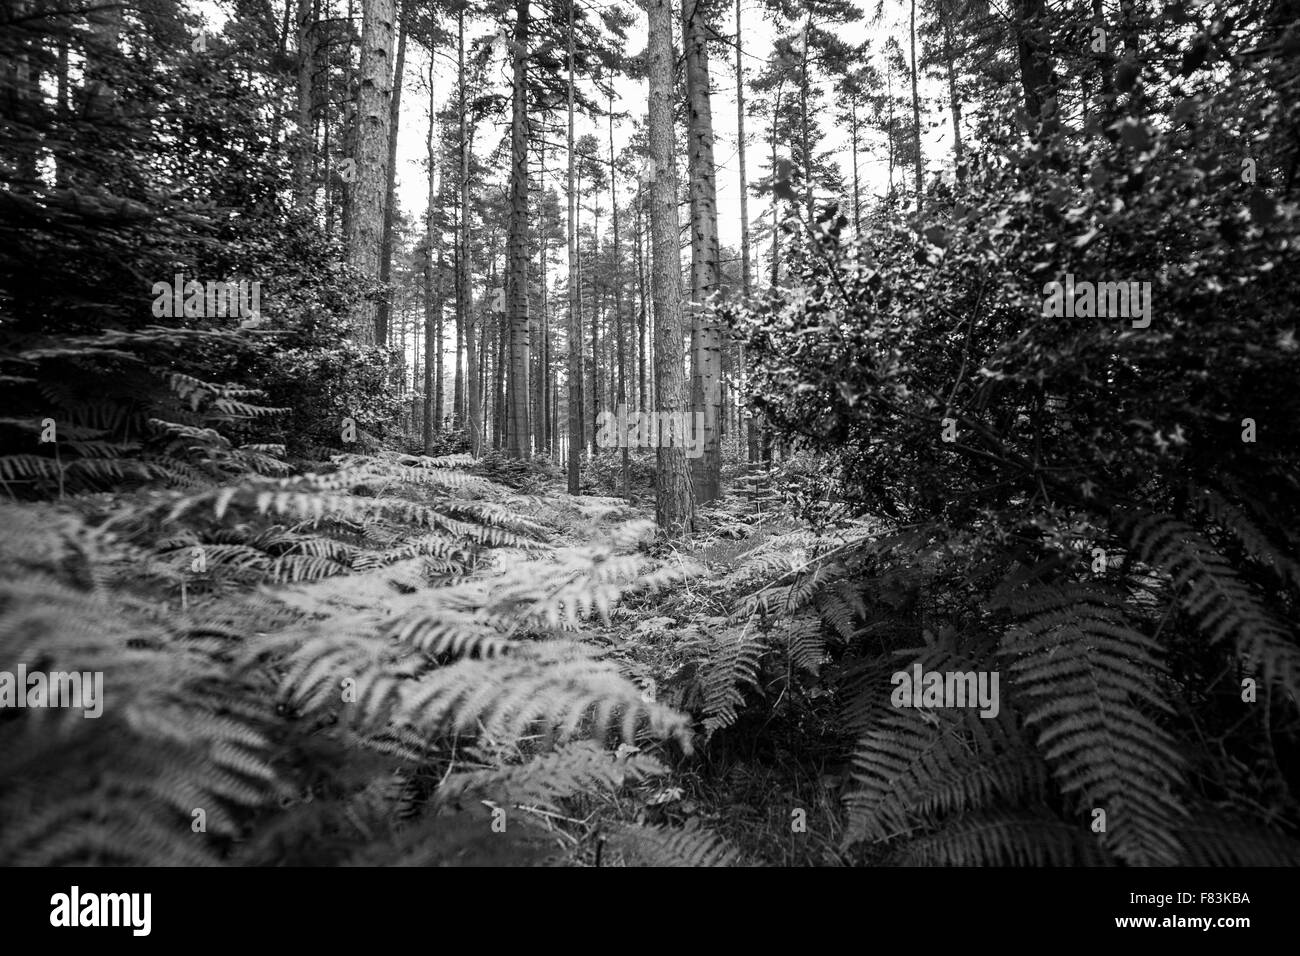 A black and white image of Donard forest. Stock Photo